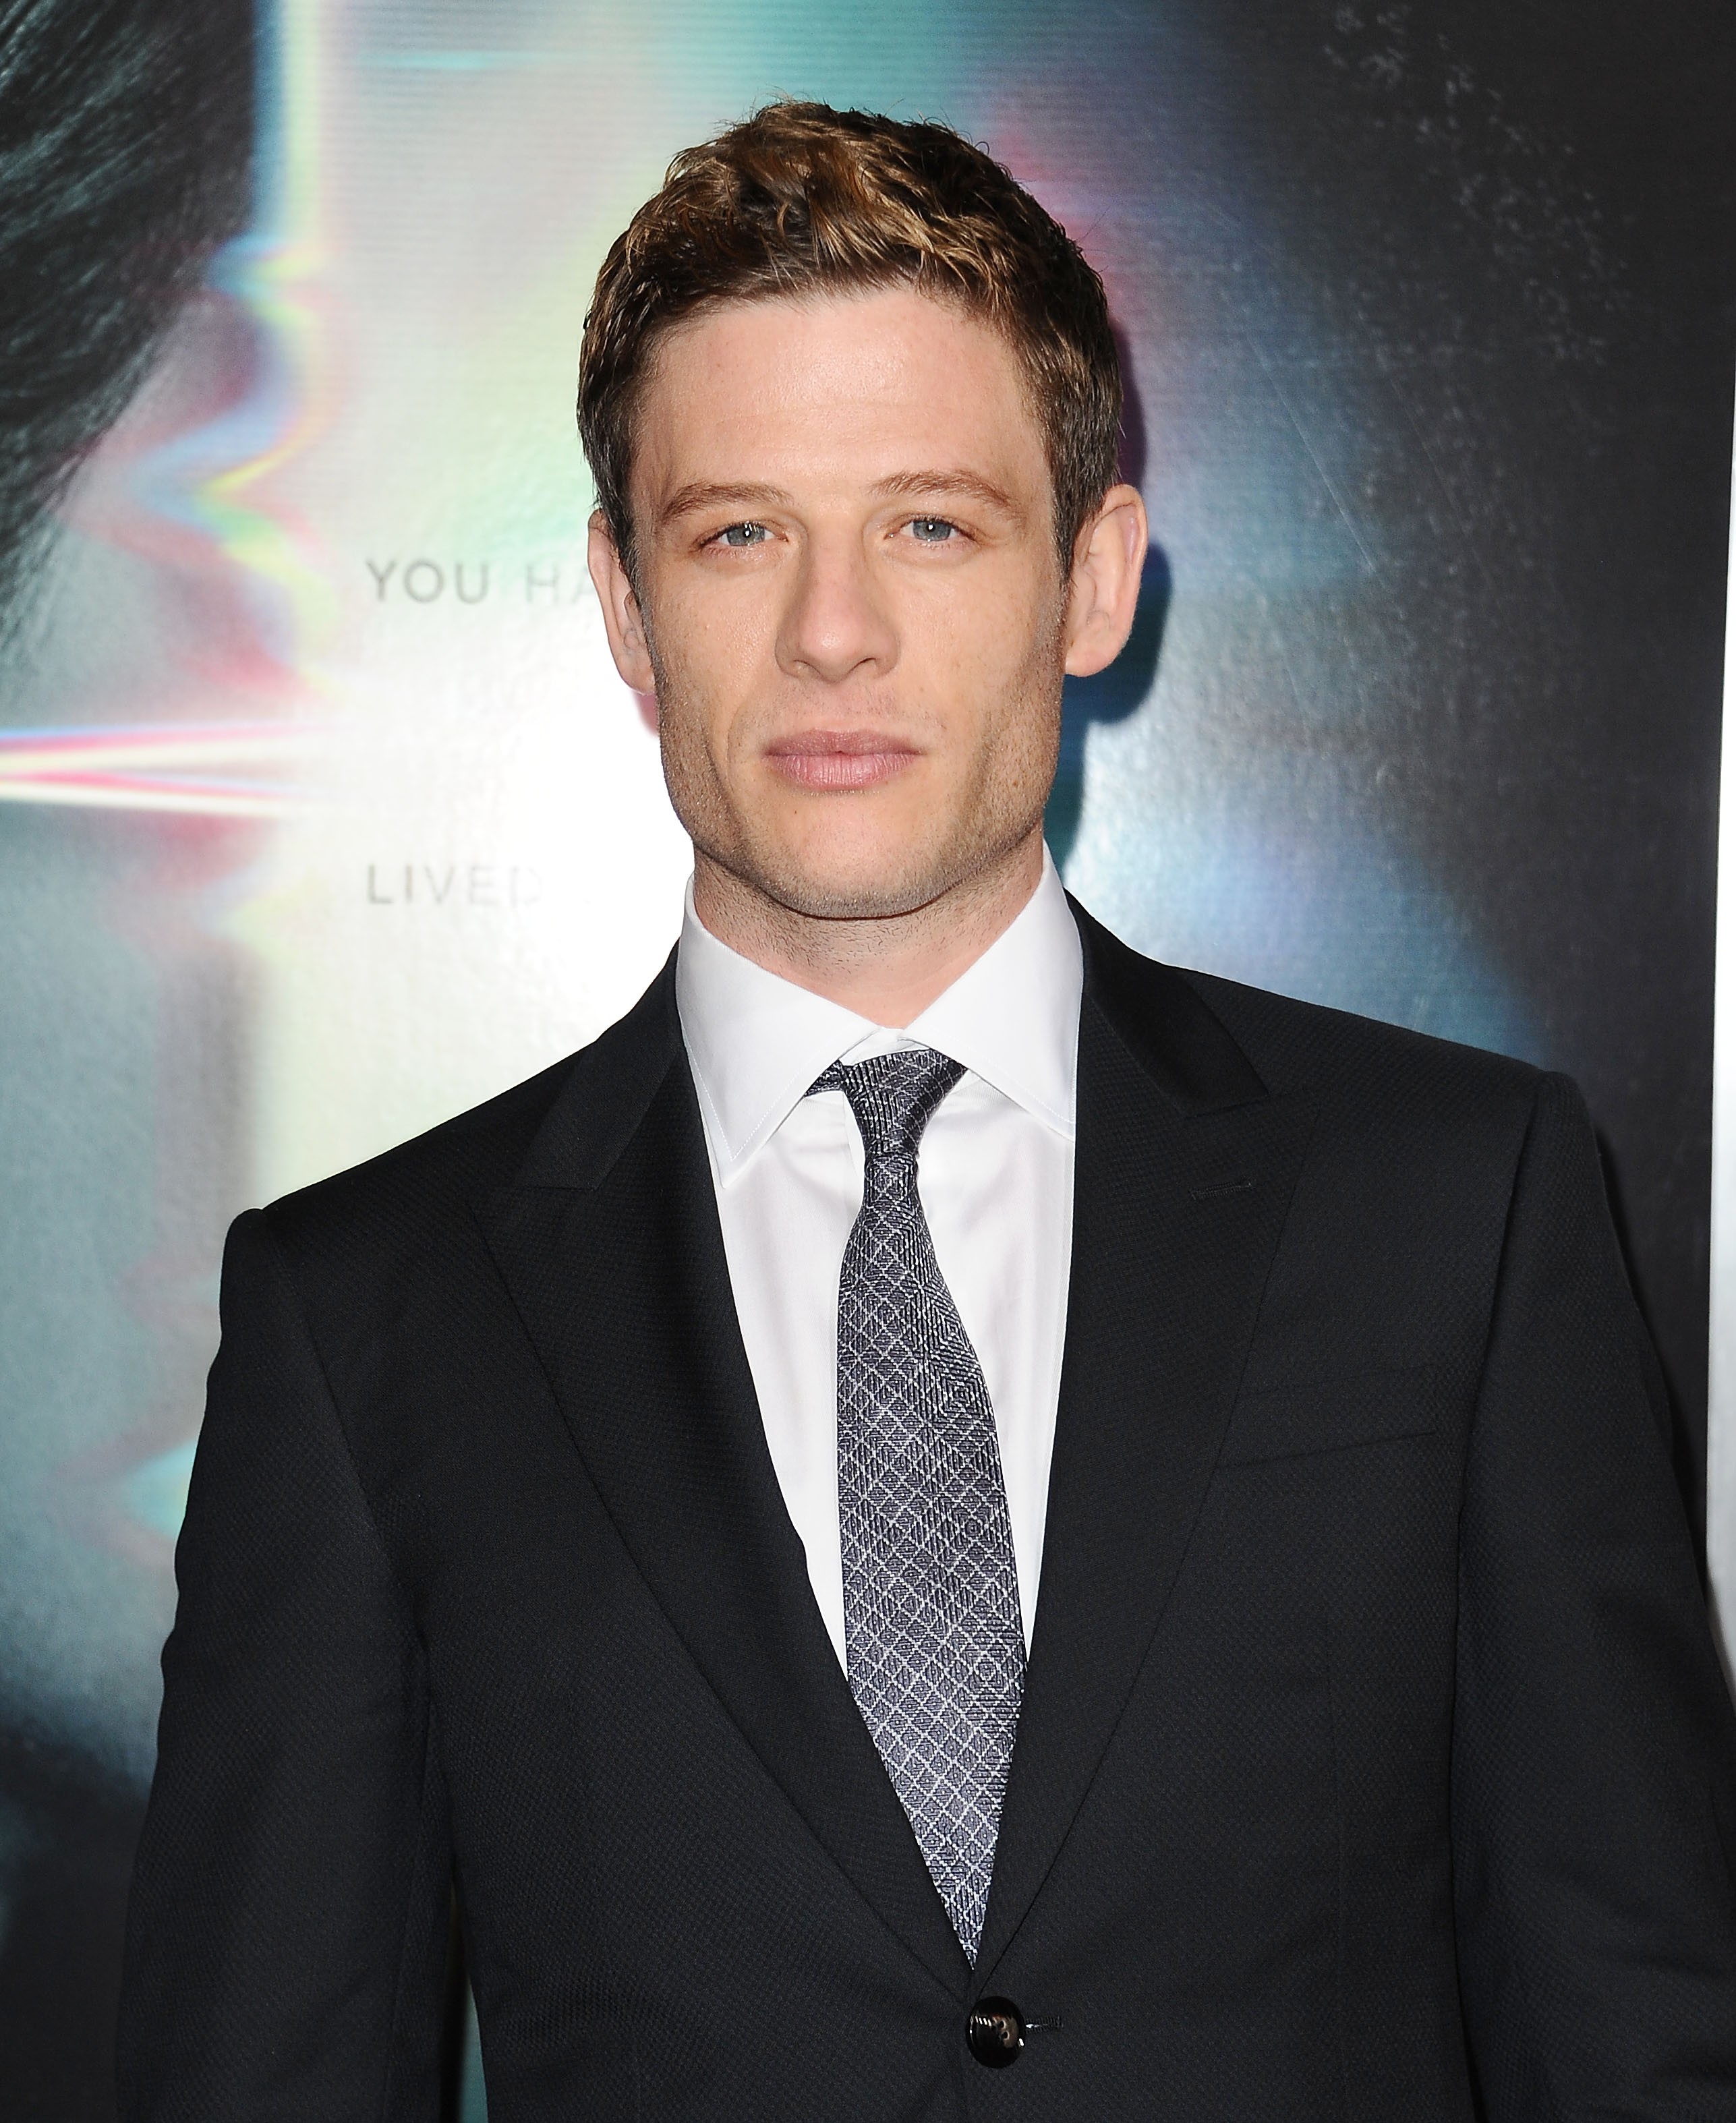 LOS ANGELES, CA - SEPTEMBER 27:  Actor James Norton attends the premiere of "Flatliners" at The Theatre at Ace Hotel on September 27, 2017 in Los Angeles, California.  (Photo by Jason LaVeris/FilmMagic) (Foto: FilmMagic)